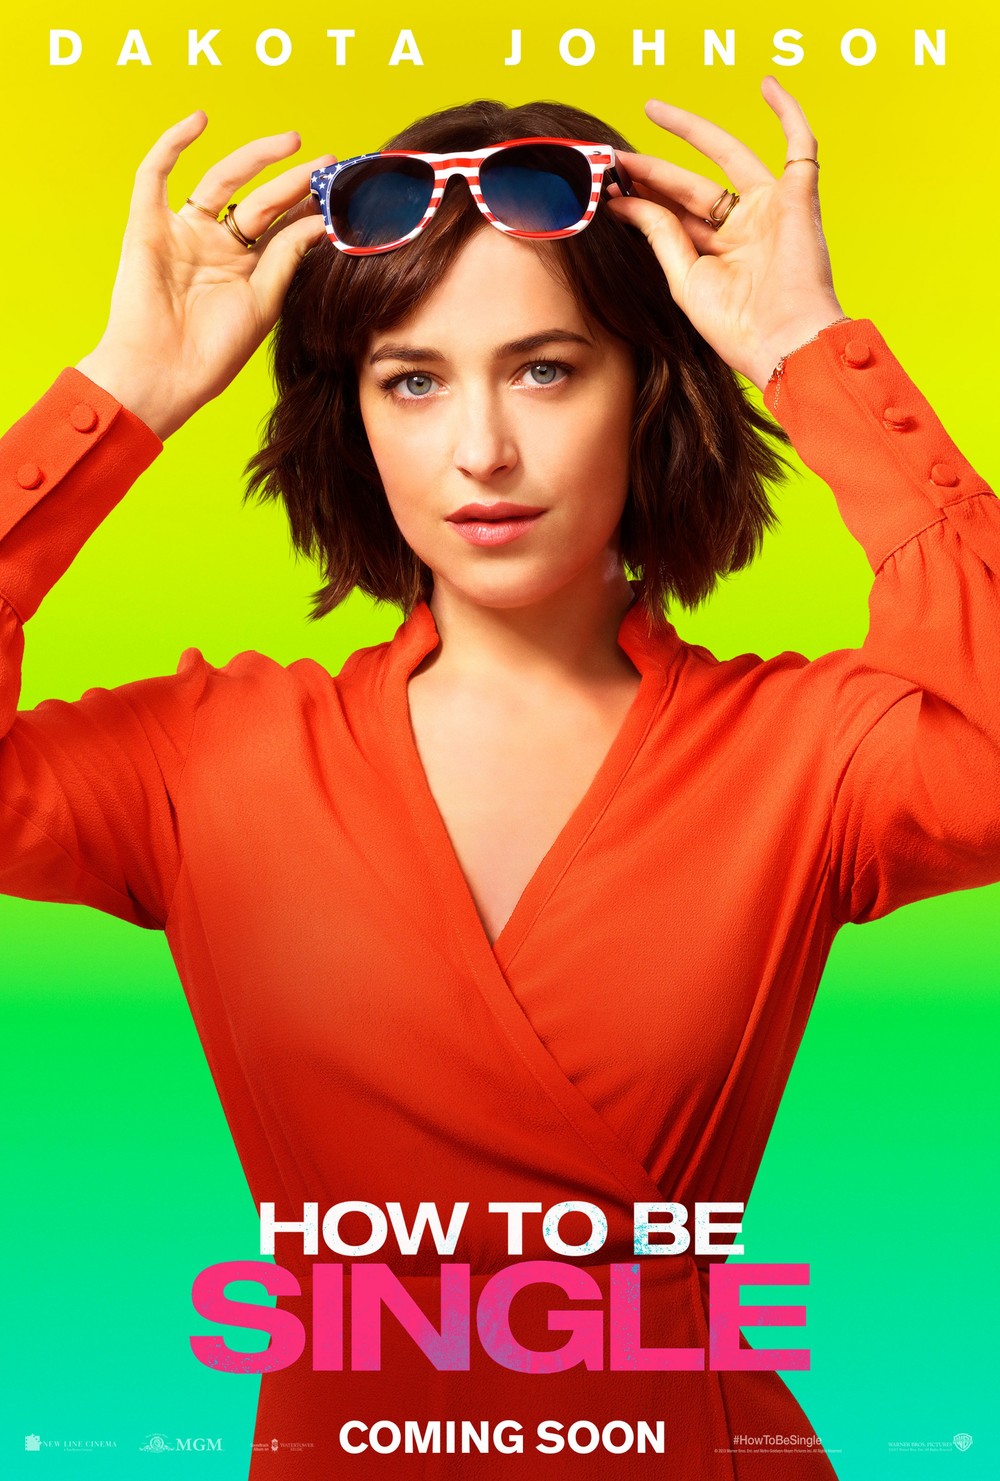 How to Be Single DVD Release Date | Redbox, Netflix ...